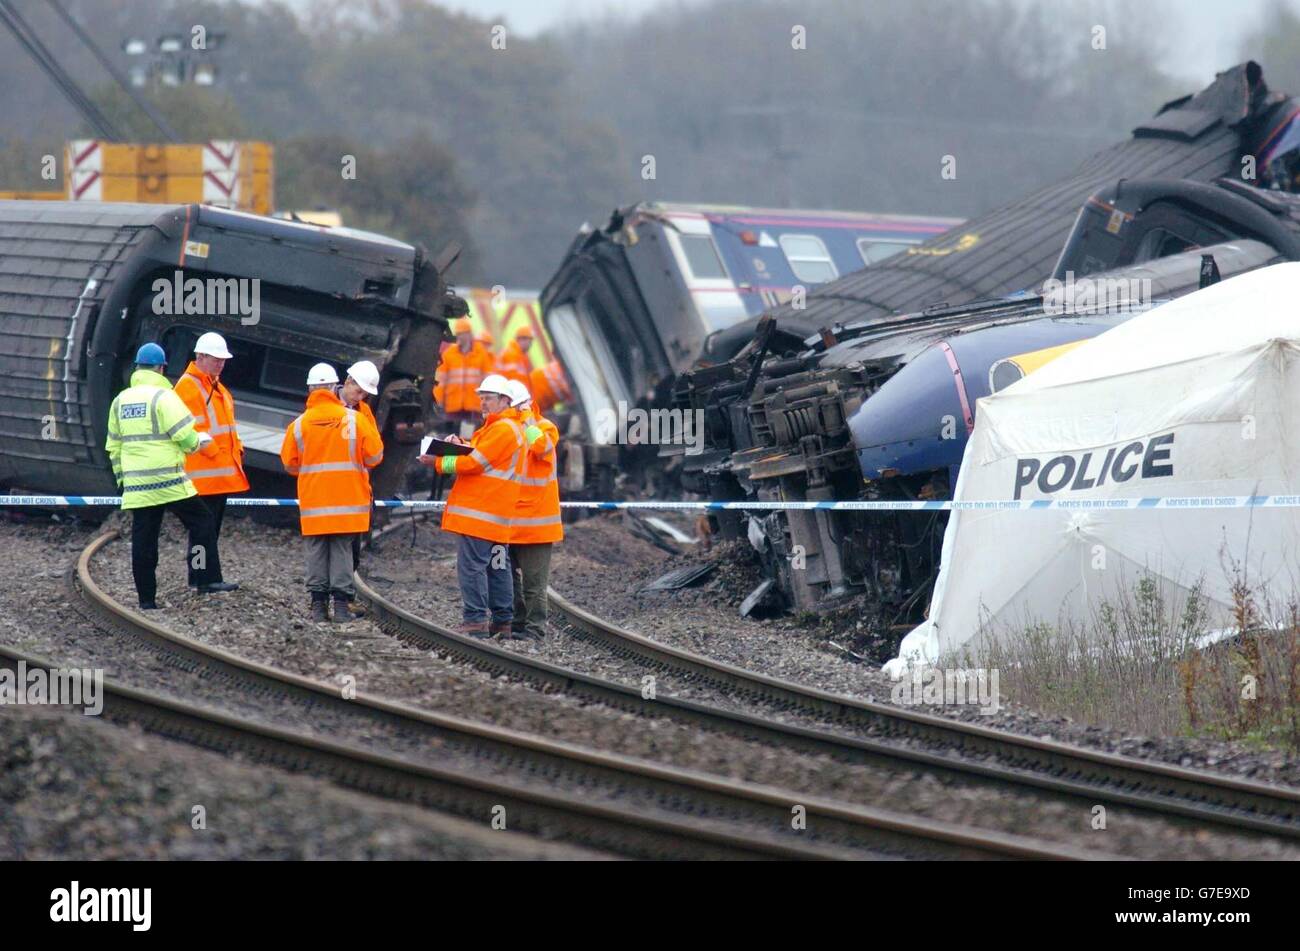 Police inspect the wreckage, of the train which hit a saloon car Saturday on a remote level crossing near Ufton Nervet in Berkshire. Six people died in the impact and a seventh died in hospital Sunday. Police investigating the incident are focusing on why a motorist parked his car in the path of the train. All the bodies have now been removed from the site and a crane is being constructed to begin clearing the wreckage. Stock Photo